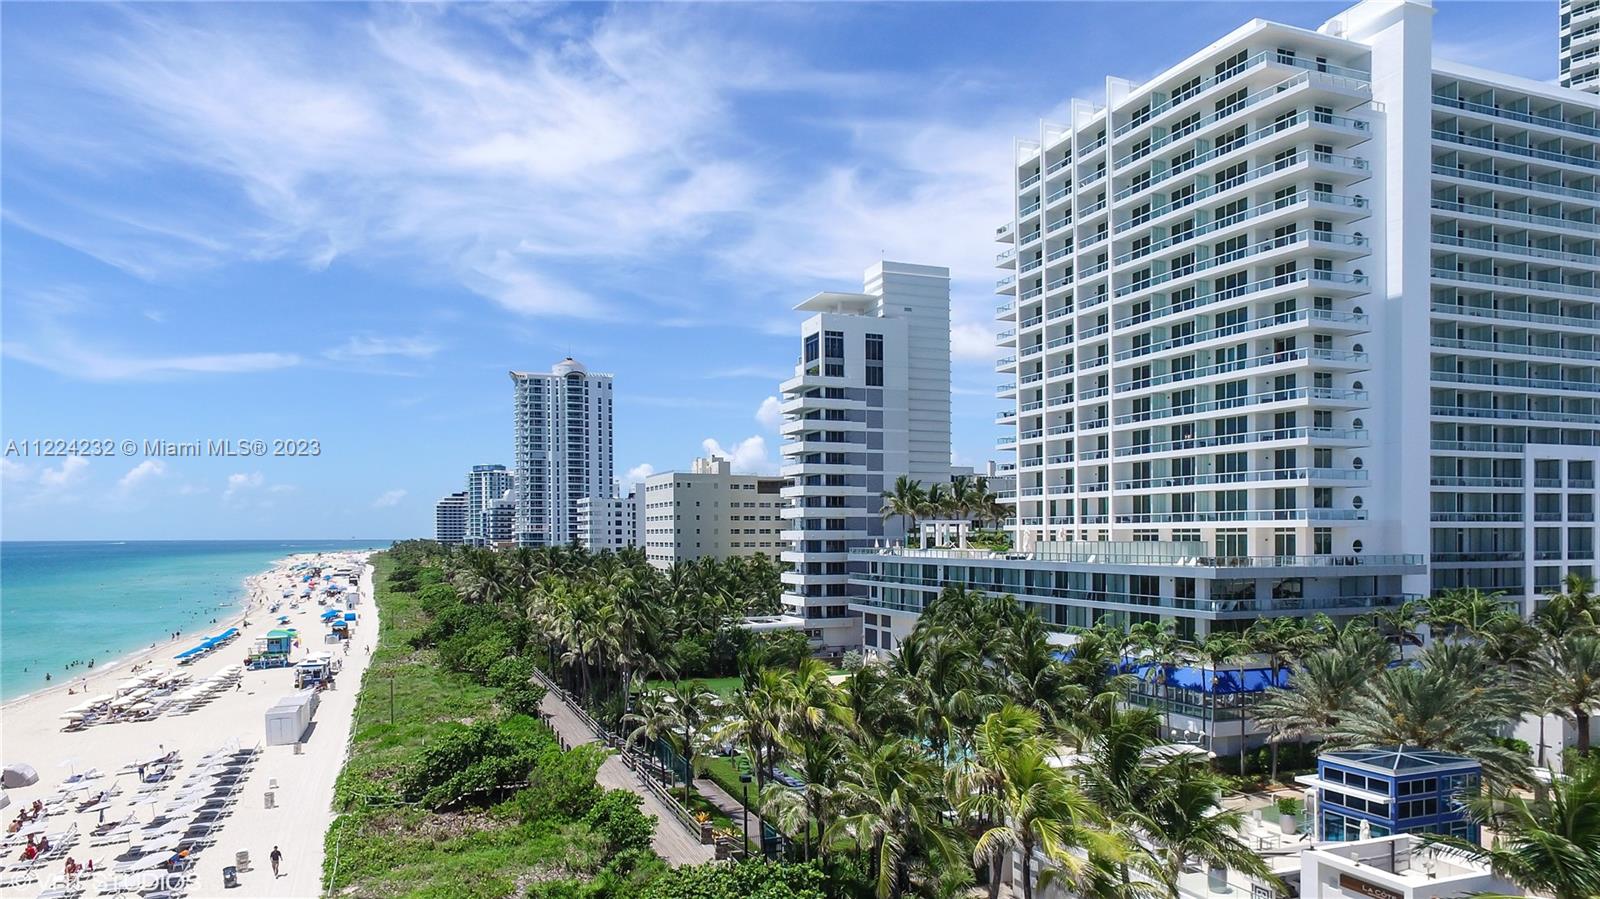 Beautiful just refurbished 2 bedrooms/3 baths with direct ocean & pool views at The Fontainebleau III. Enjoy full service, vacation-style living in a furnished turnkey unit with a full kitchen, 2 king beds, 2 sleeper sofas, 3 balconies, washer/dryer & more. Enroll in hotel rental program & receive income while away! The Fontainebleau Resort offers luxury amenities on 22 oceanfront acres including award-winning restaurants, LIV night club, Lapis spa & state-of-the-art fitness center. Maintenance includes: AC, local calls, electricity, valet + daily free breakfast in the owners lounge.